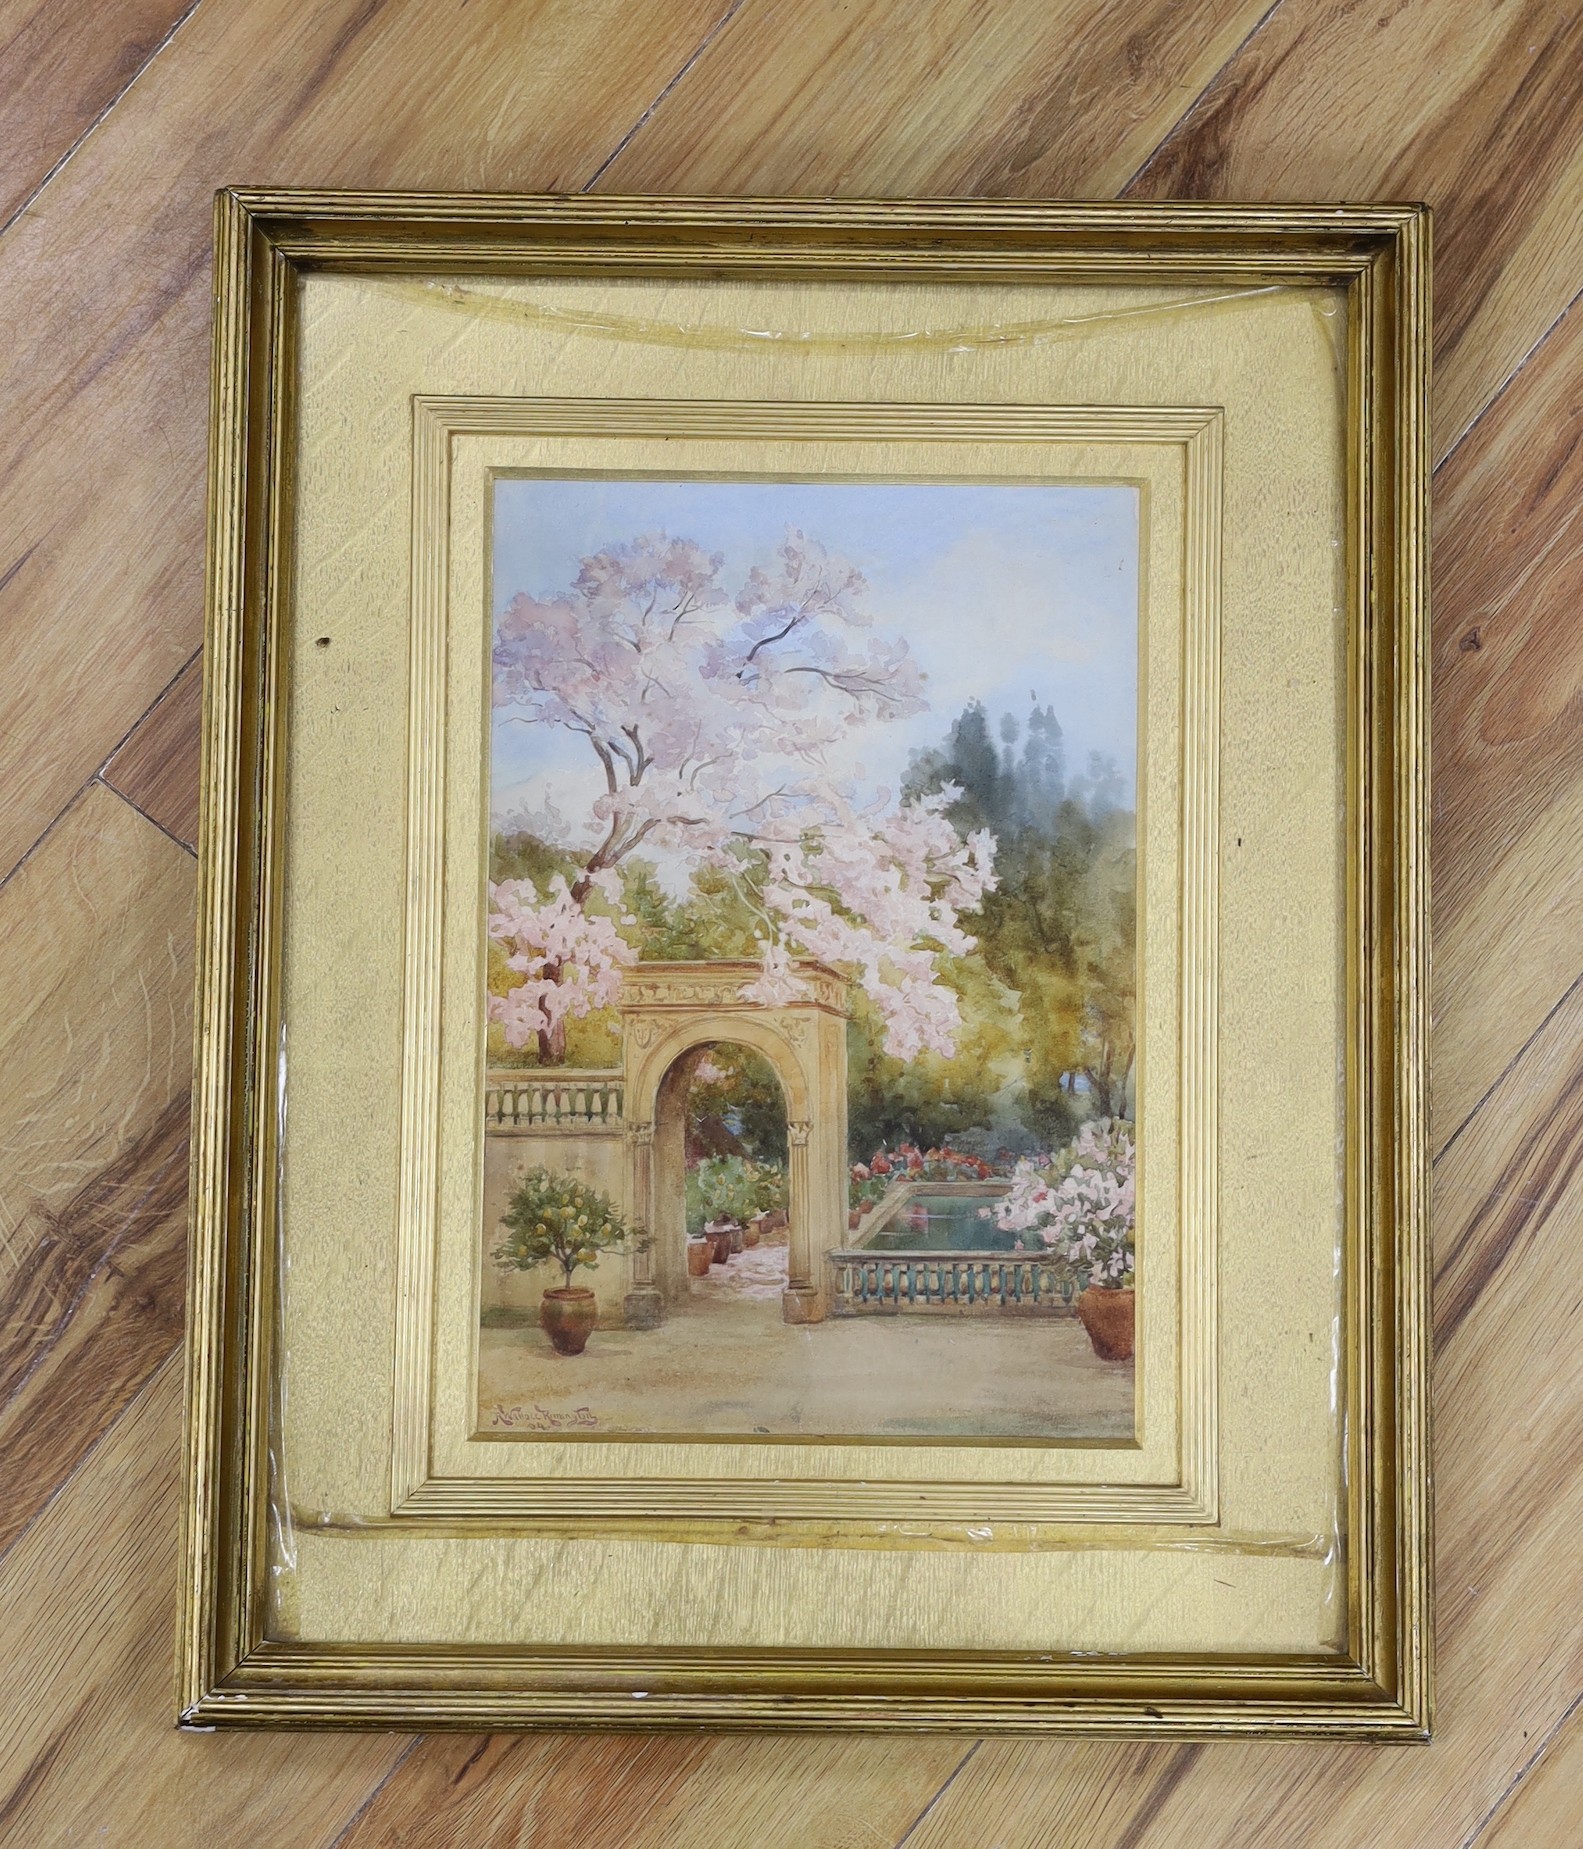 A. Wallace Remington, 'Japanese Magnolia', signed and dated, 34 x 24cm